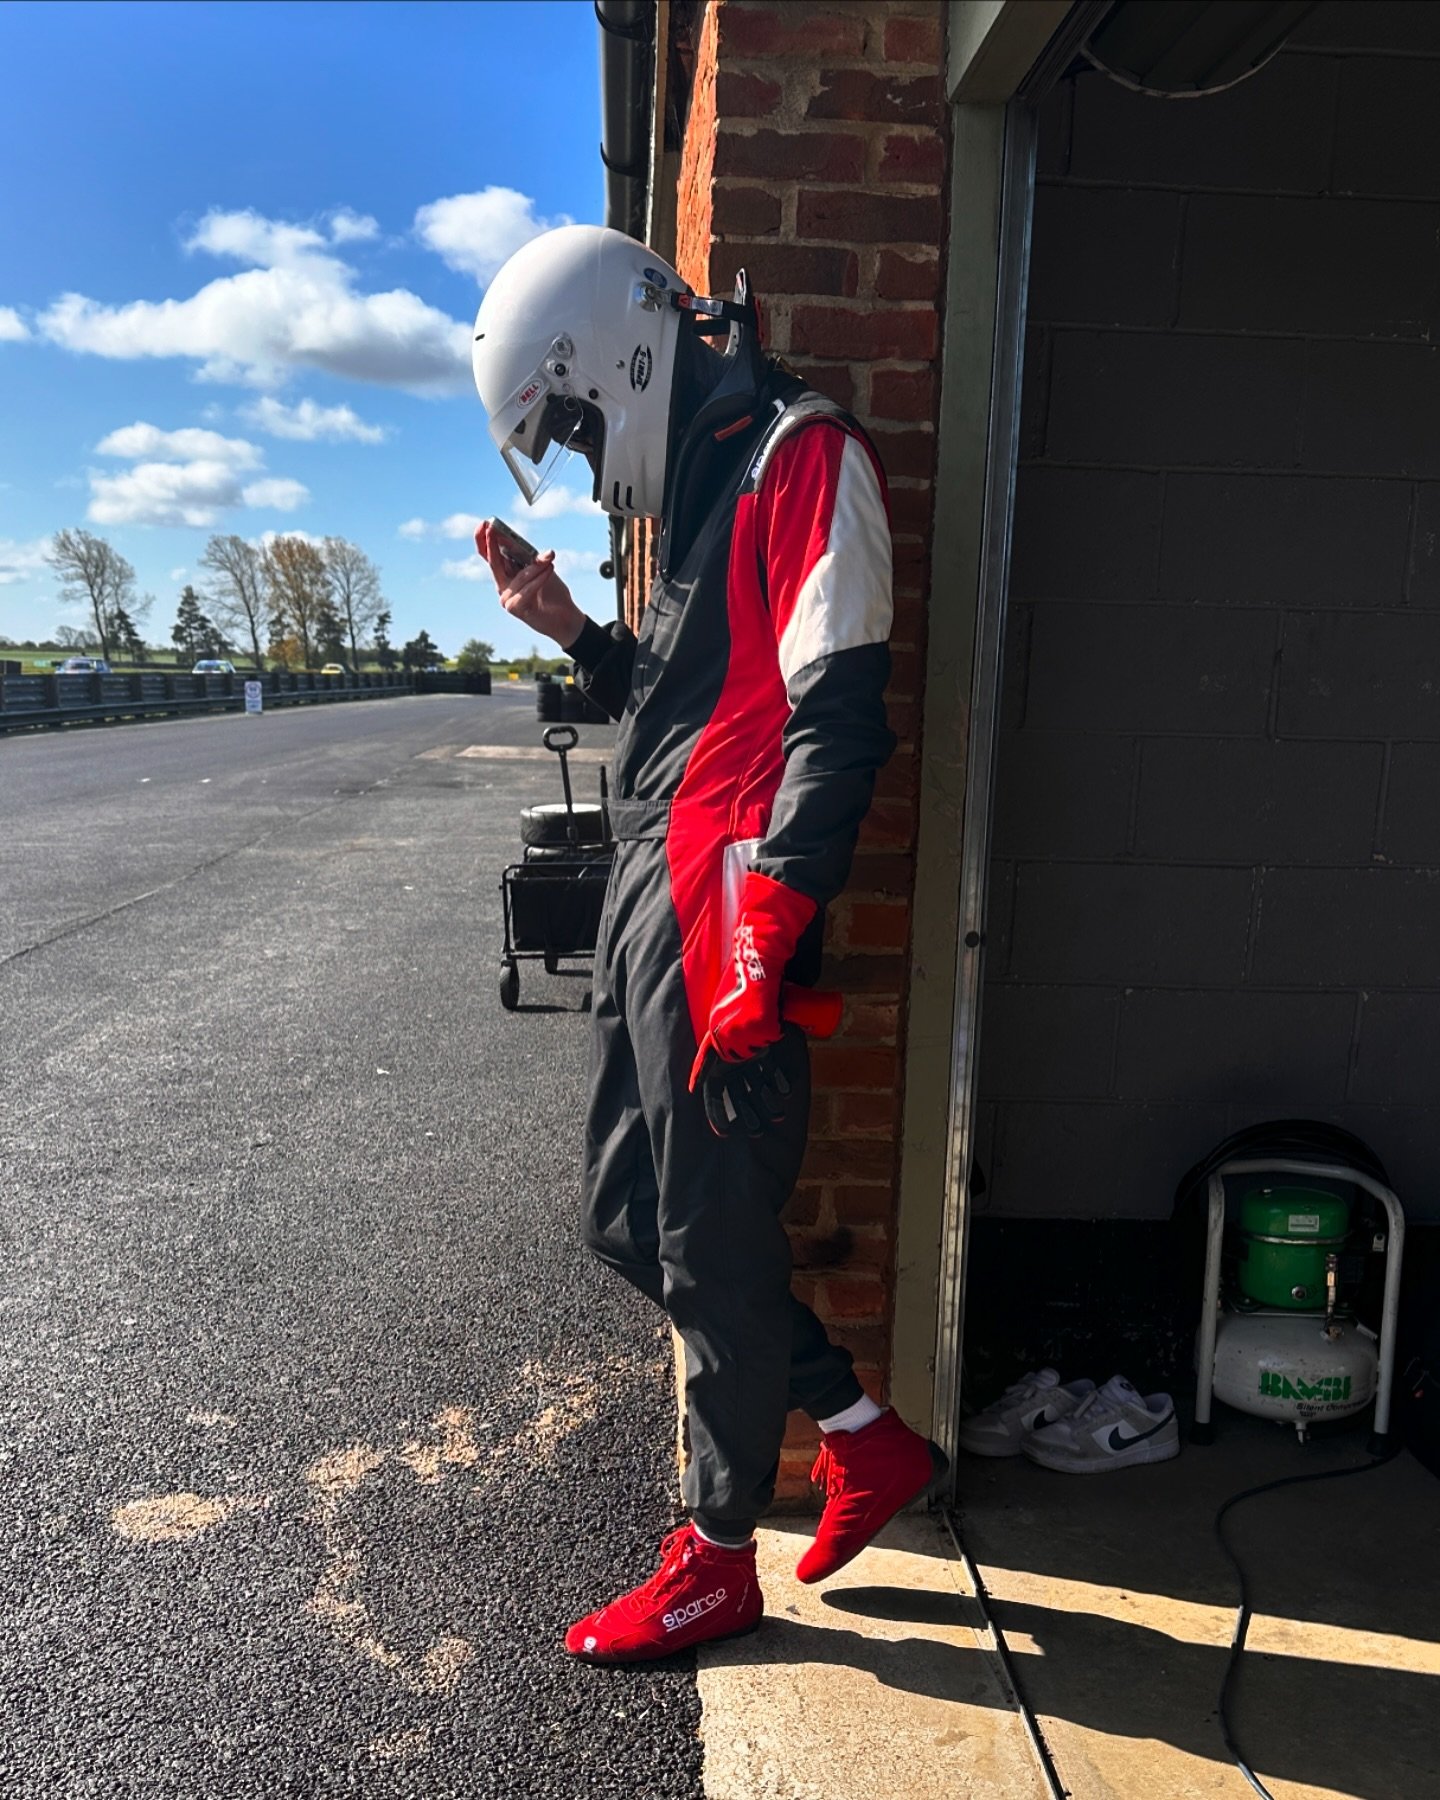 @jamescleasby is also ready for the race, just checking out the video from last session of yesterday. Tegiwa Road Sport Series.

#raceday #racedrivers #racedrivergrid #750racing #tegiwaroadsportsseries